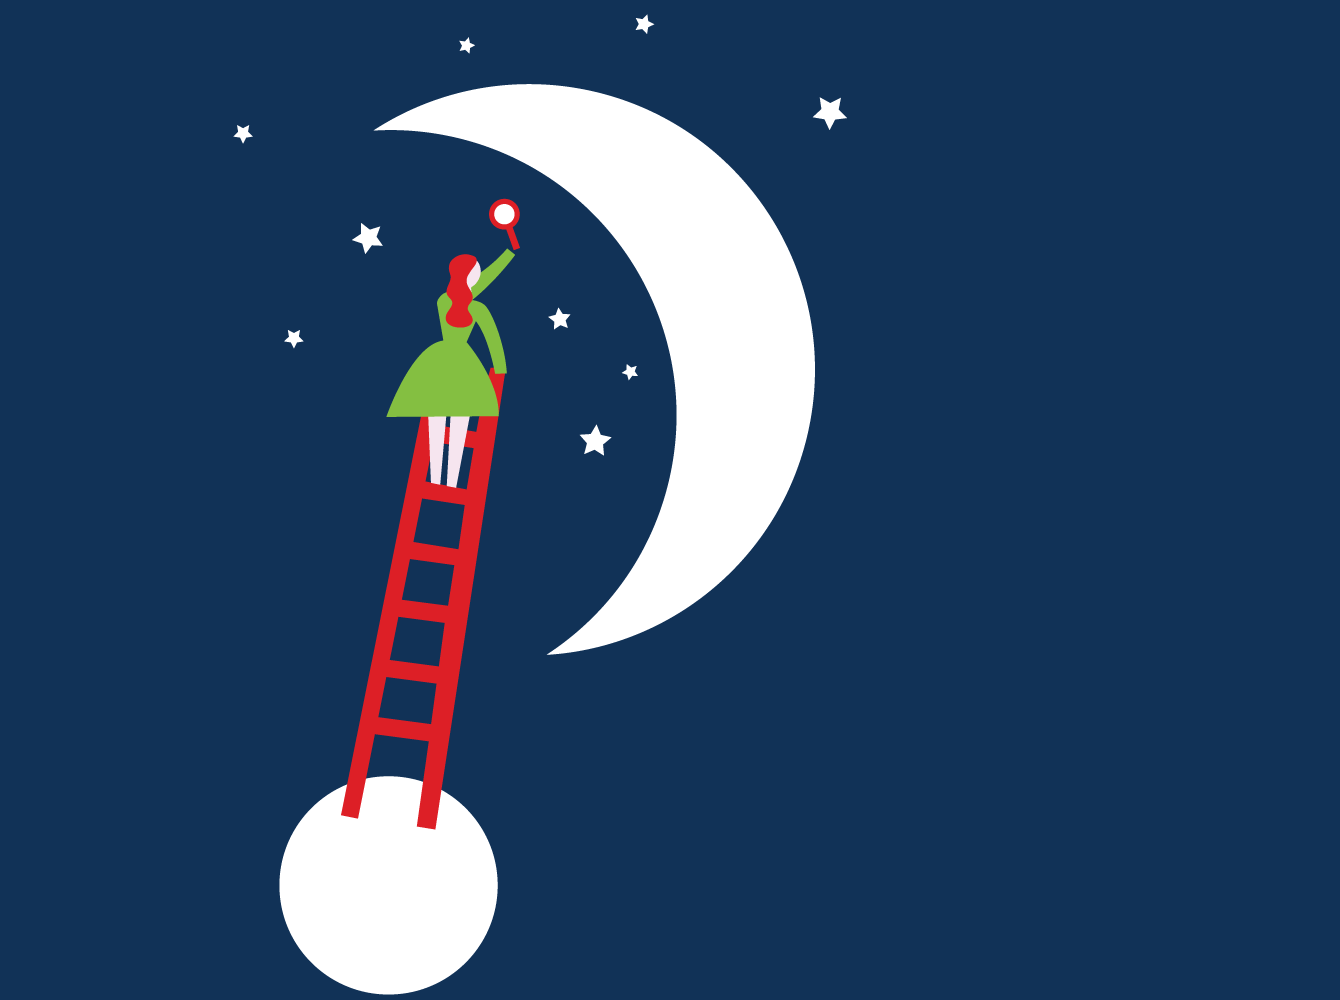 Ladder with moon and stars